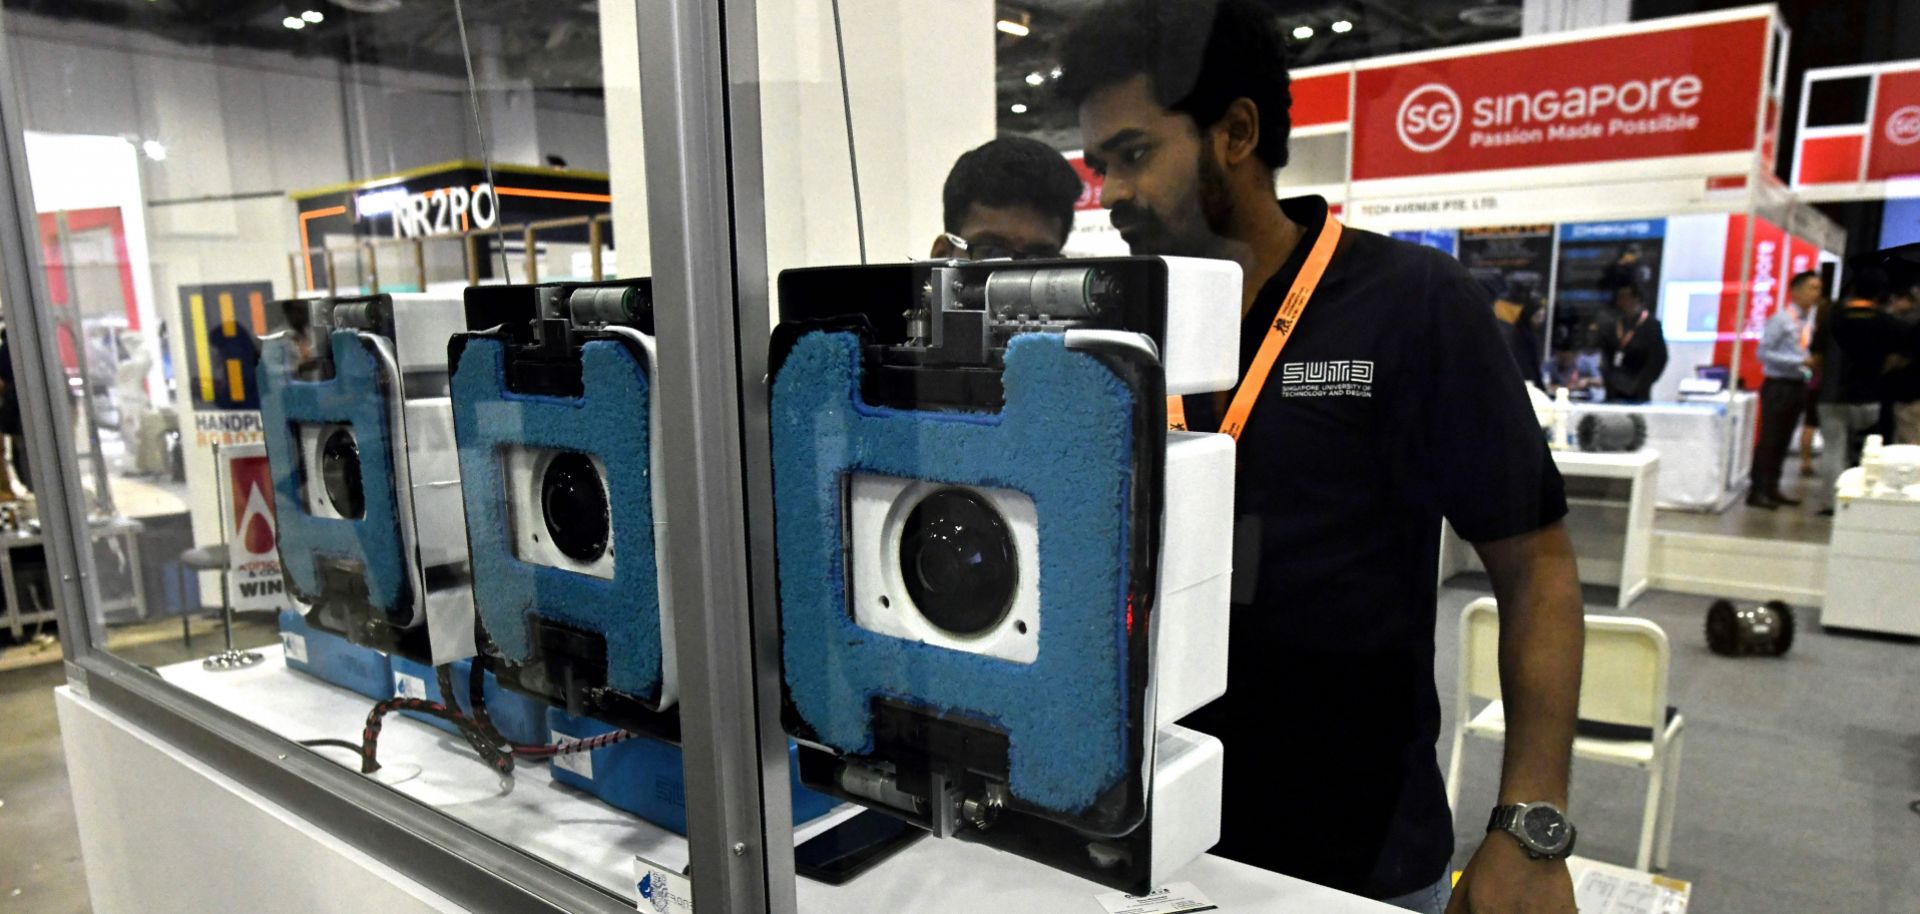 Representatives from Singapore University Technology and Design demonstrate prototype window-cleaning robots during an international exposition in November 2018.